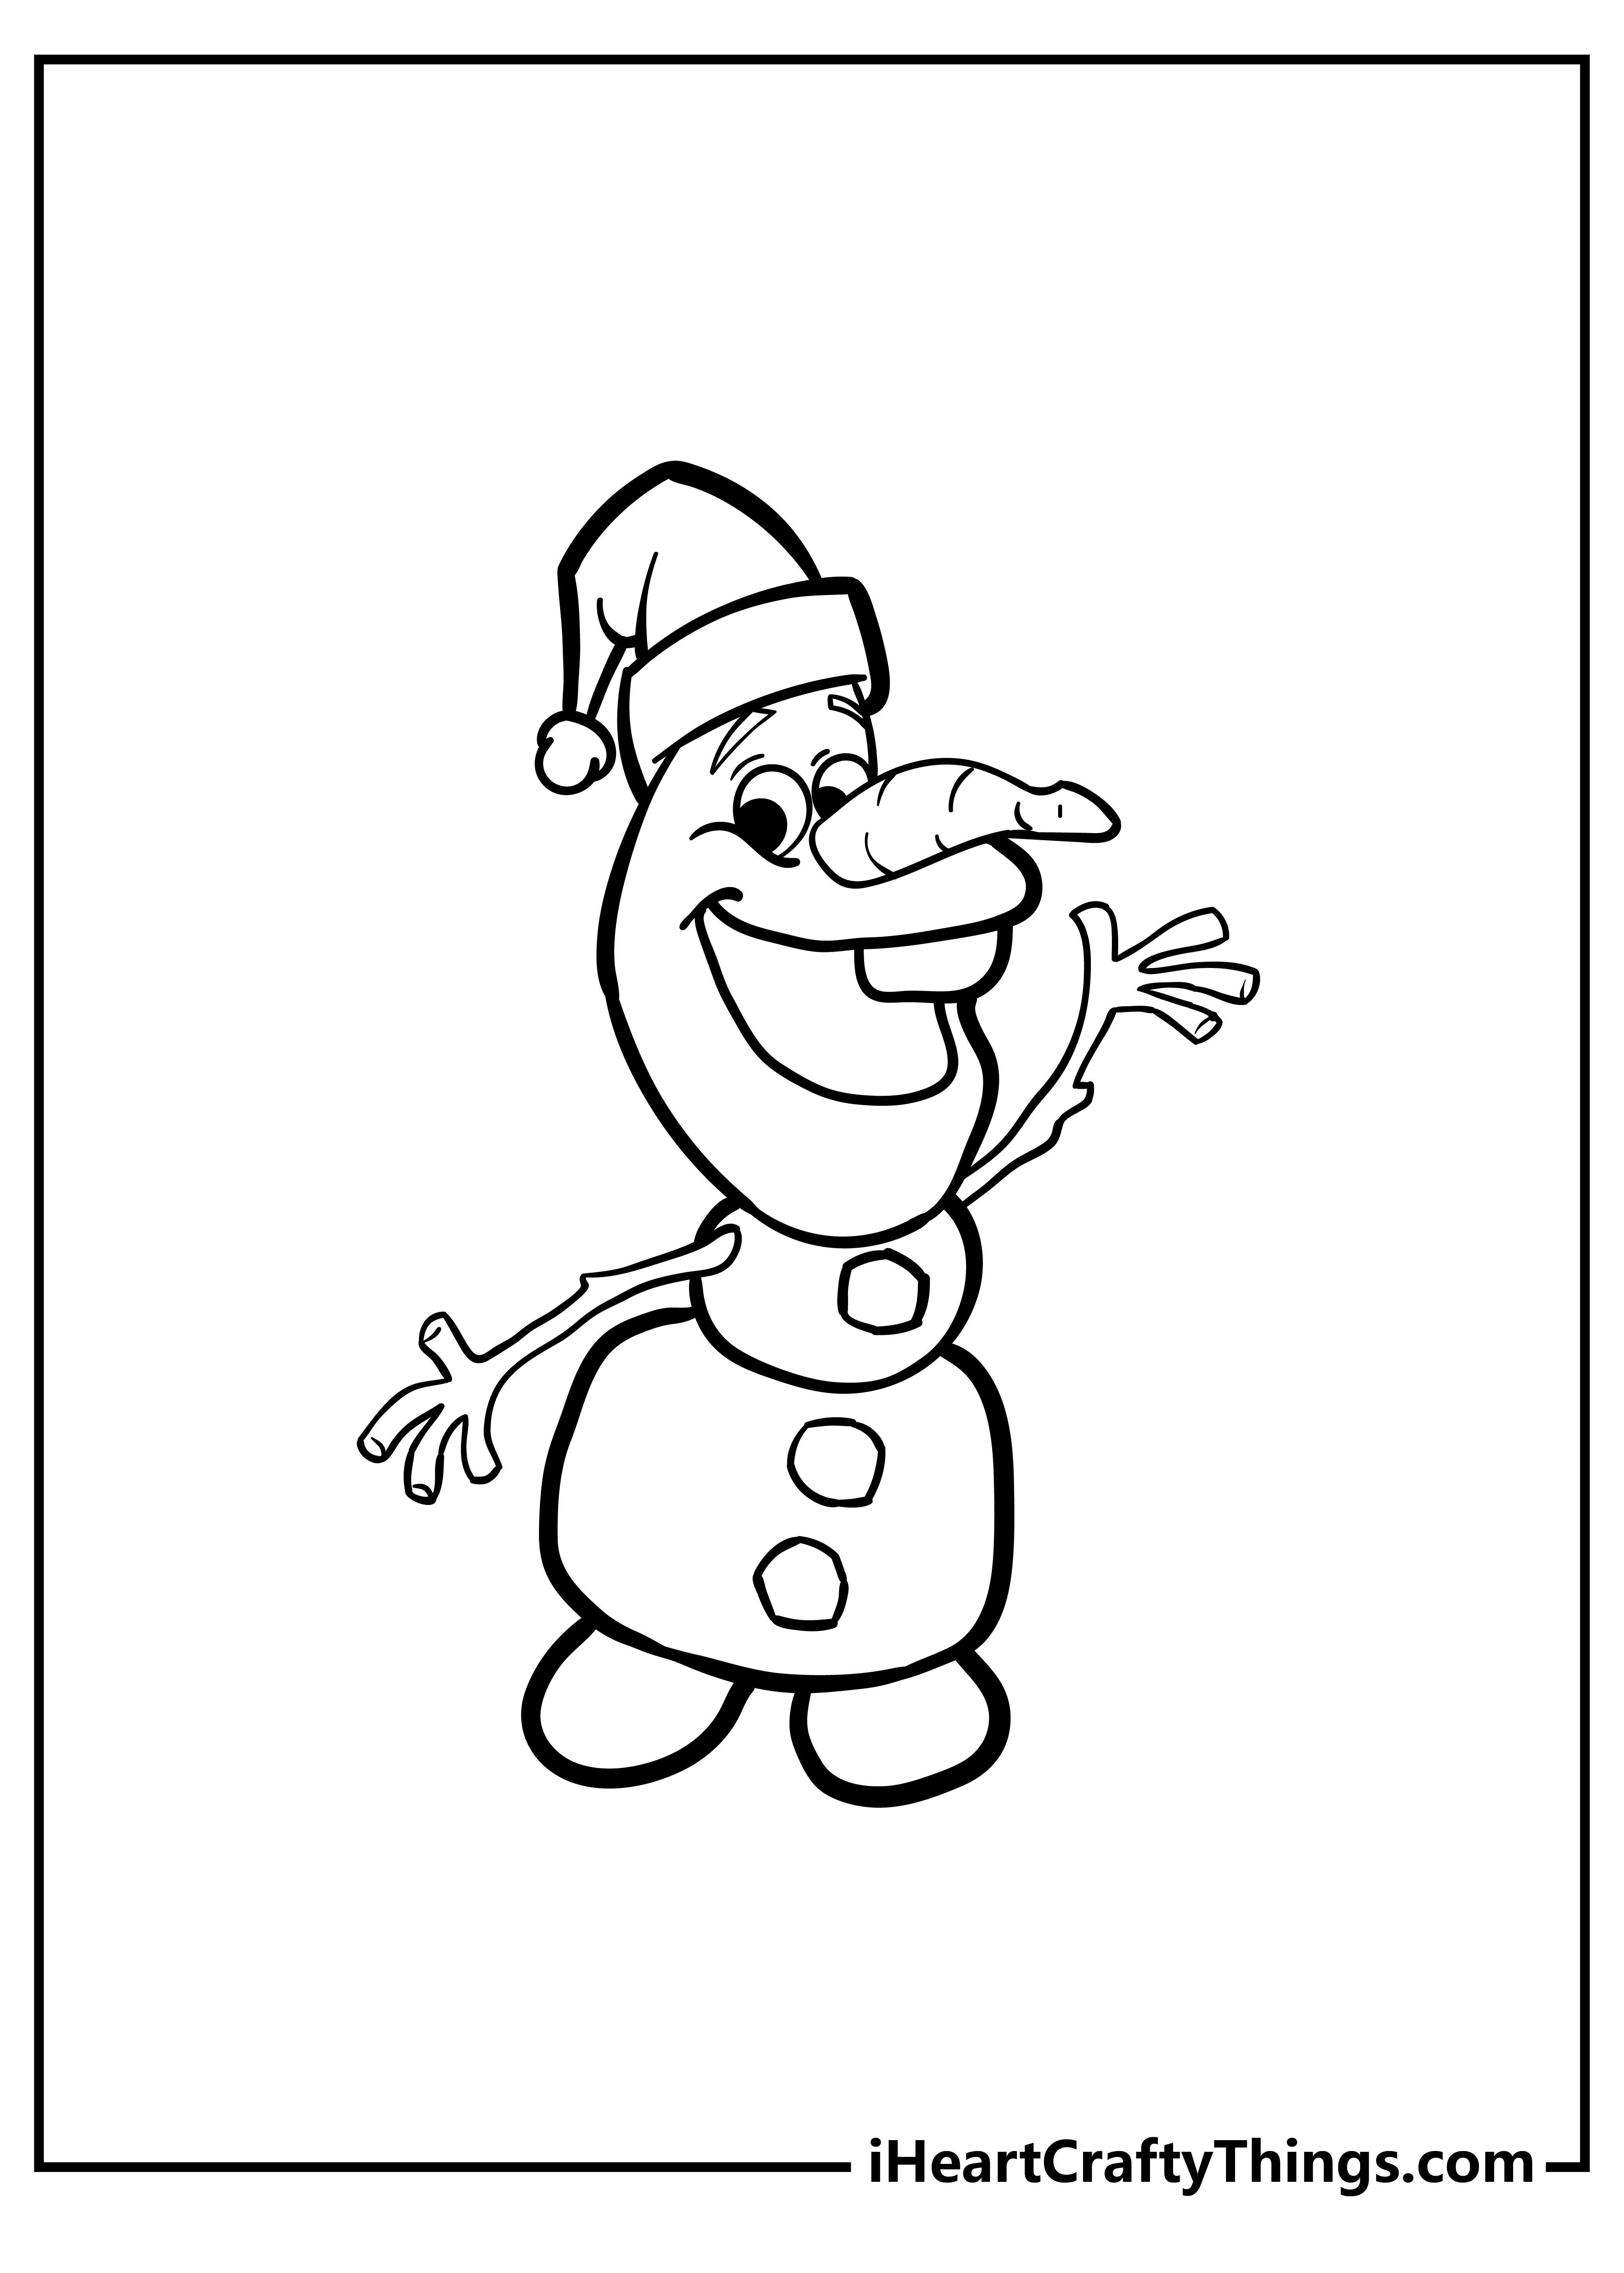 Olaf Coloring Book for kids free printable